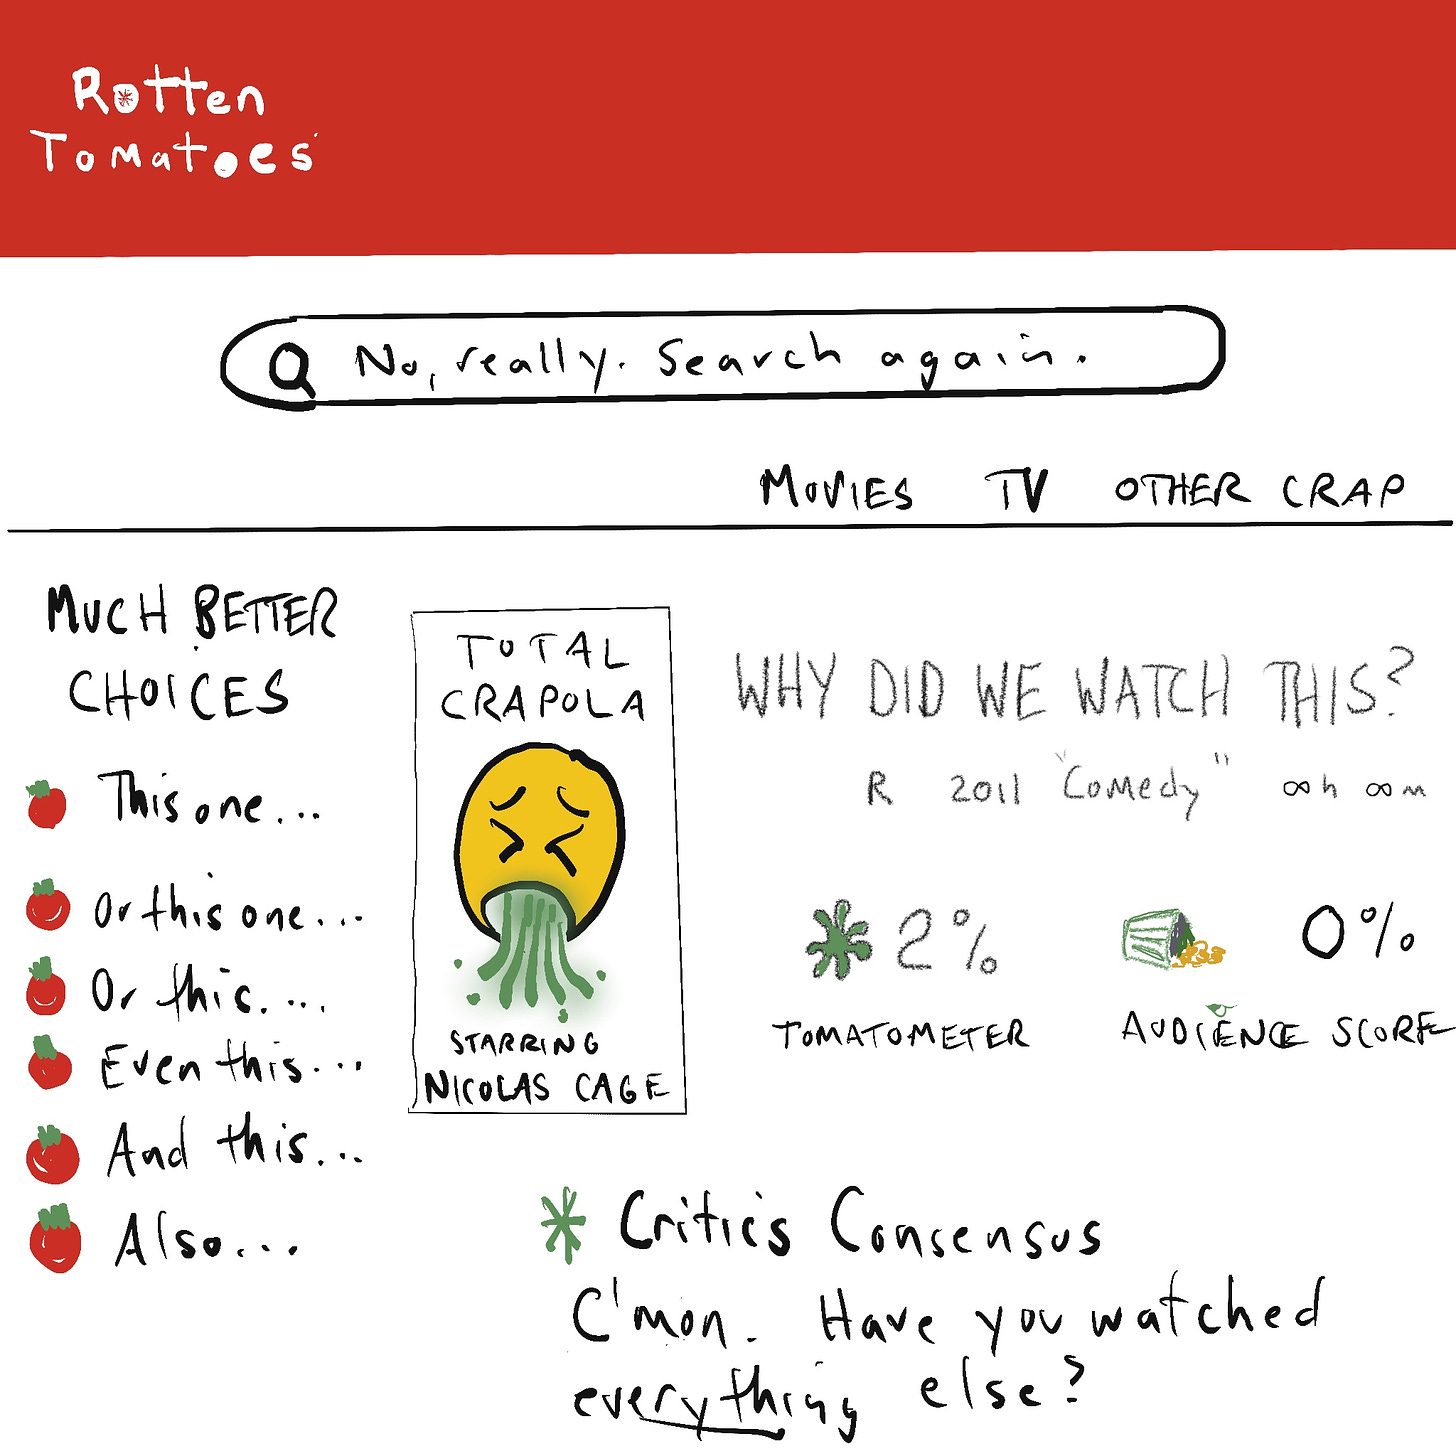 Rotten Tomatoes page for a really bad movie